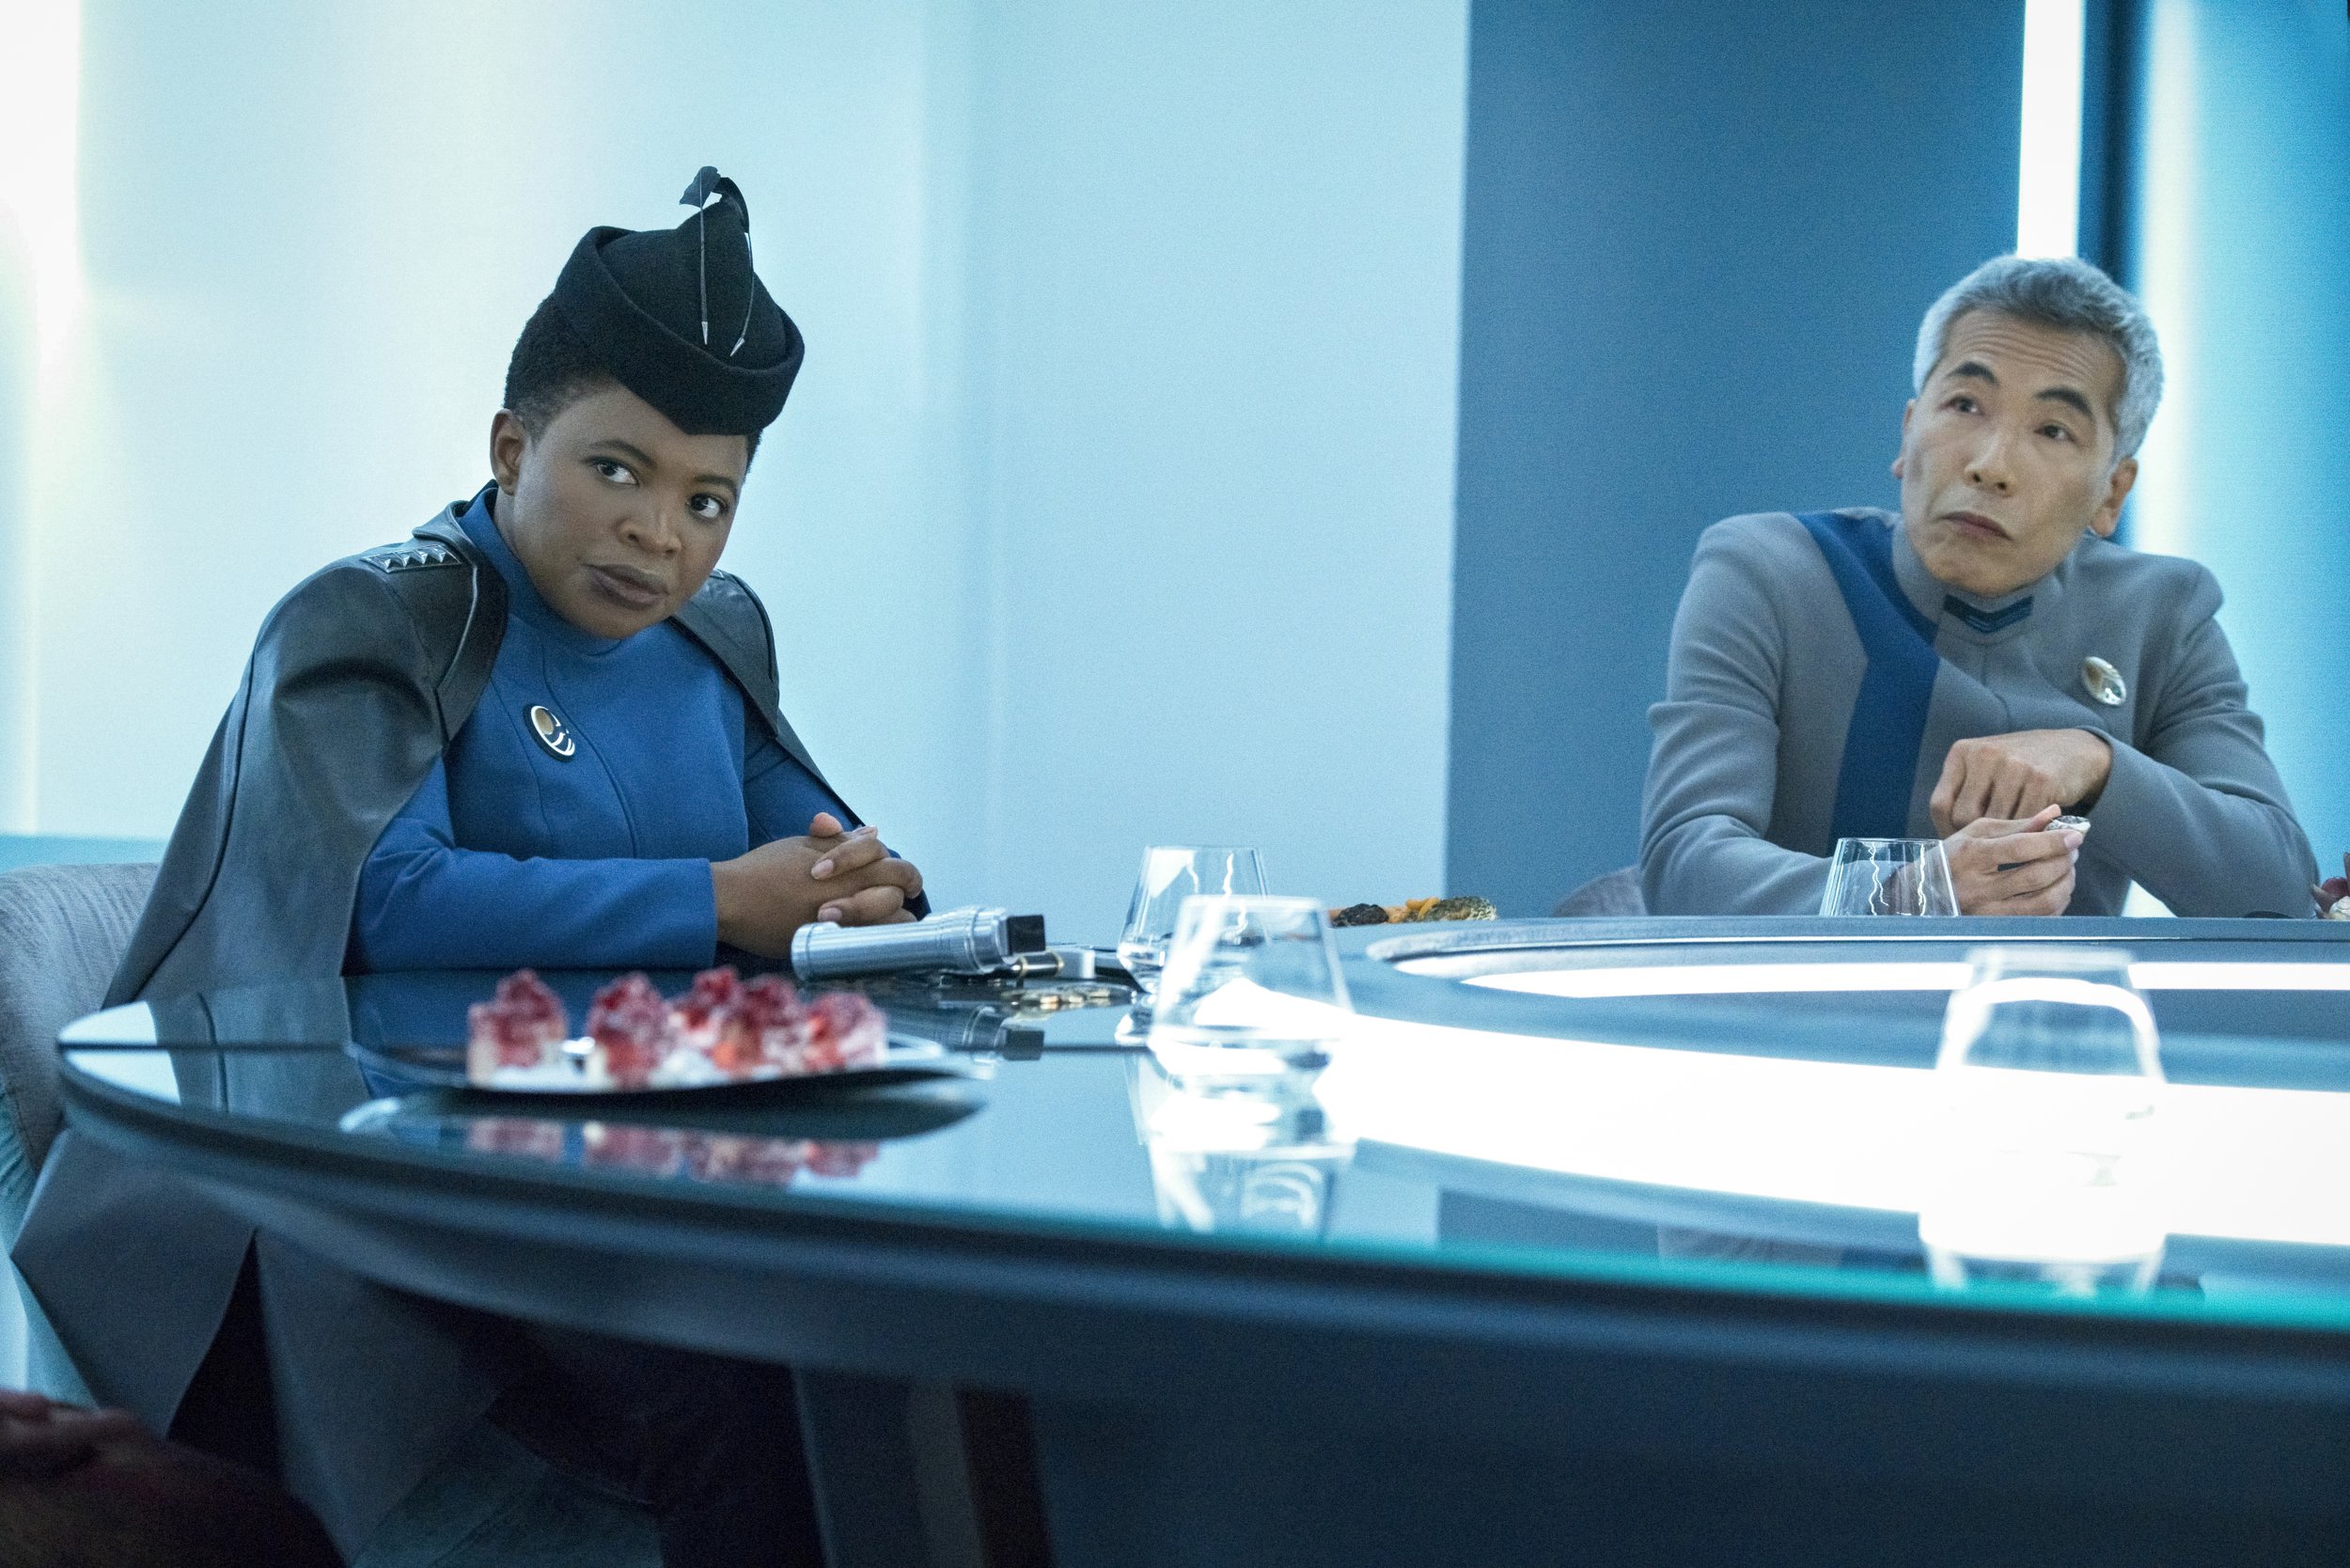   Pictured: Phumzile Sitole as Capt. Ndoye and Hiro Kanagawa as Dr. Hirai of the Paramount+ original series STAR TREK: DISCOVERY. Photo Cr: Michael Gibson/Paramount+ (C) 2021 CBS Interactive. All Rights Reserved.  